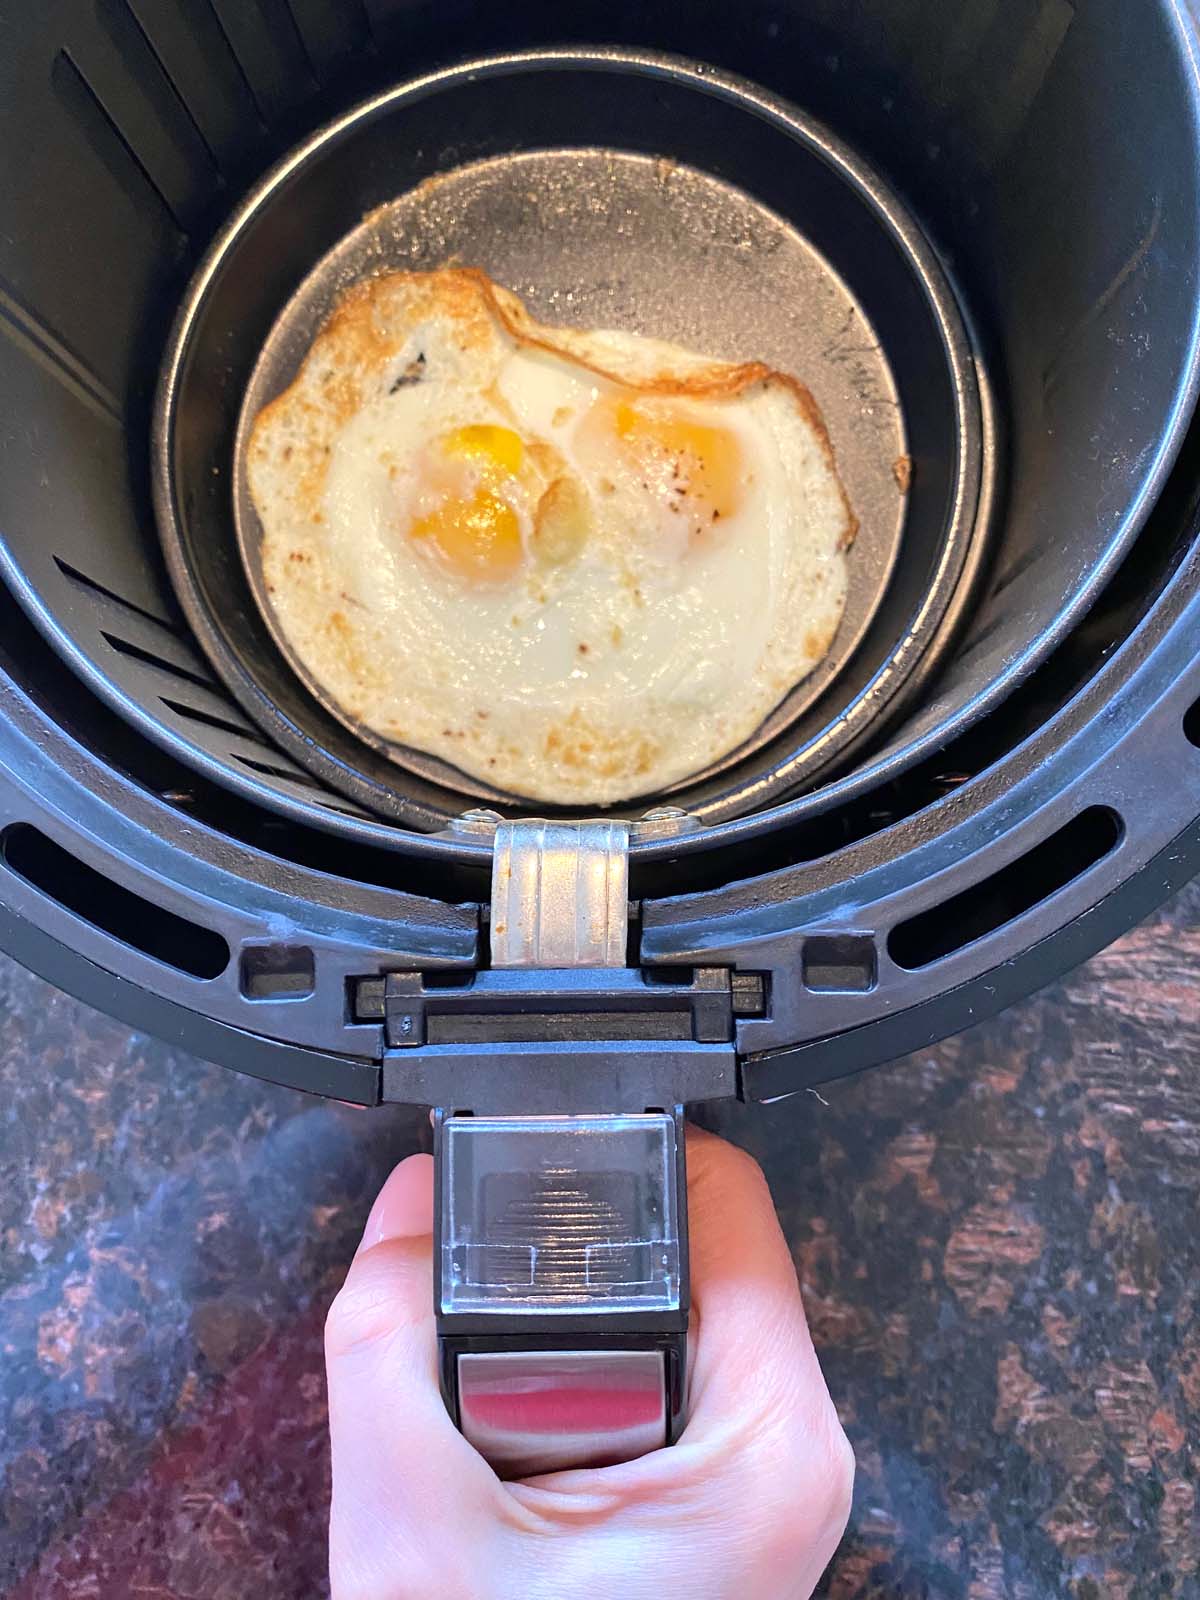 Hand holding handle of air fryer basket with 2 cooked eggs inside in a pan.